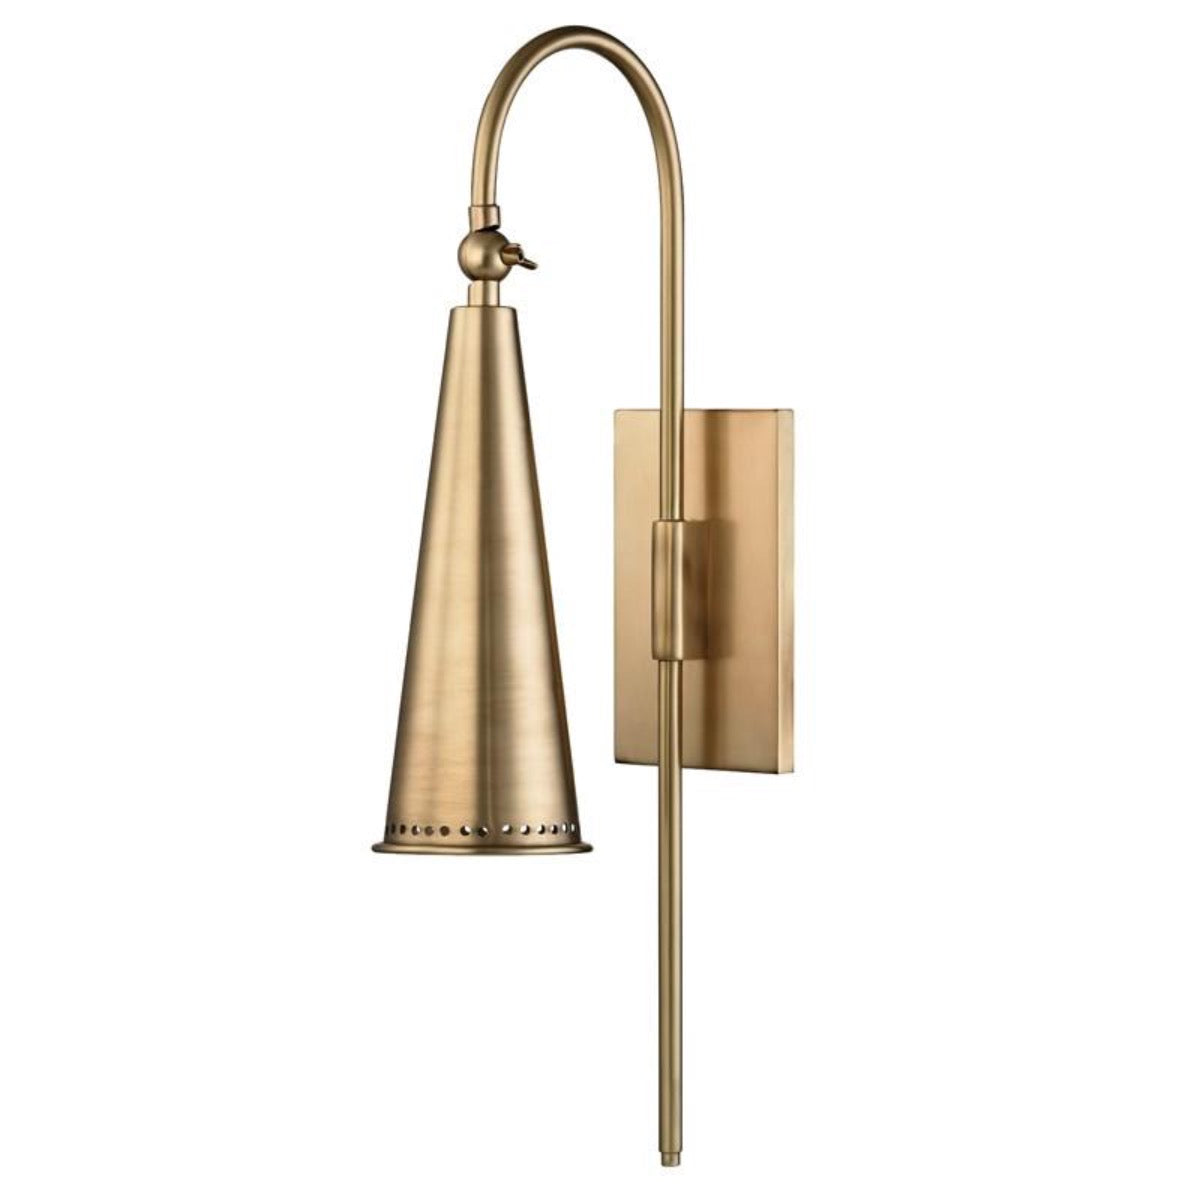 Callista Aged Brass Sconce. Front view.